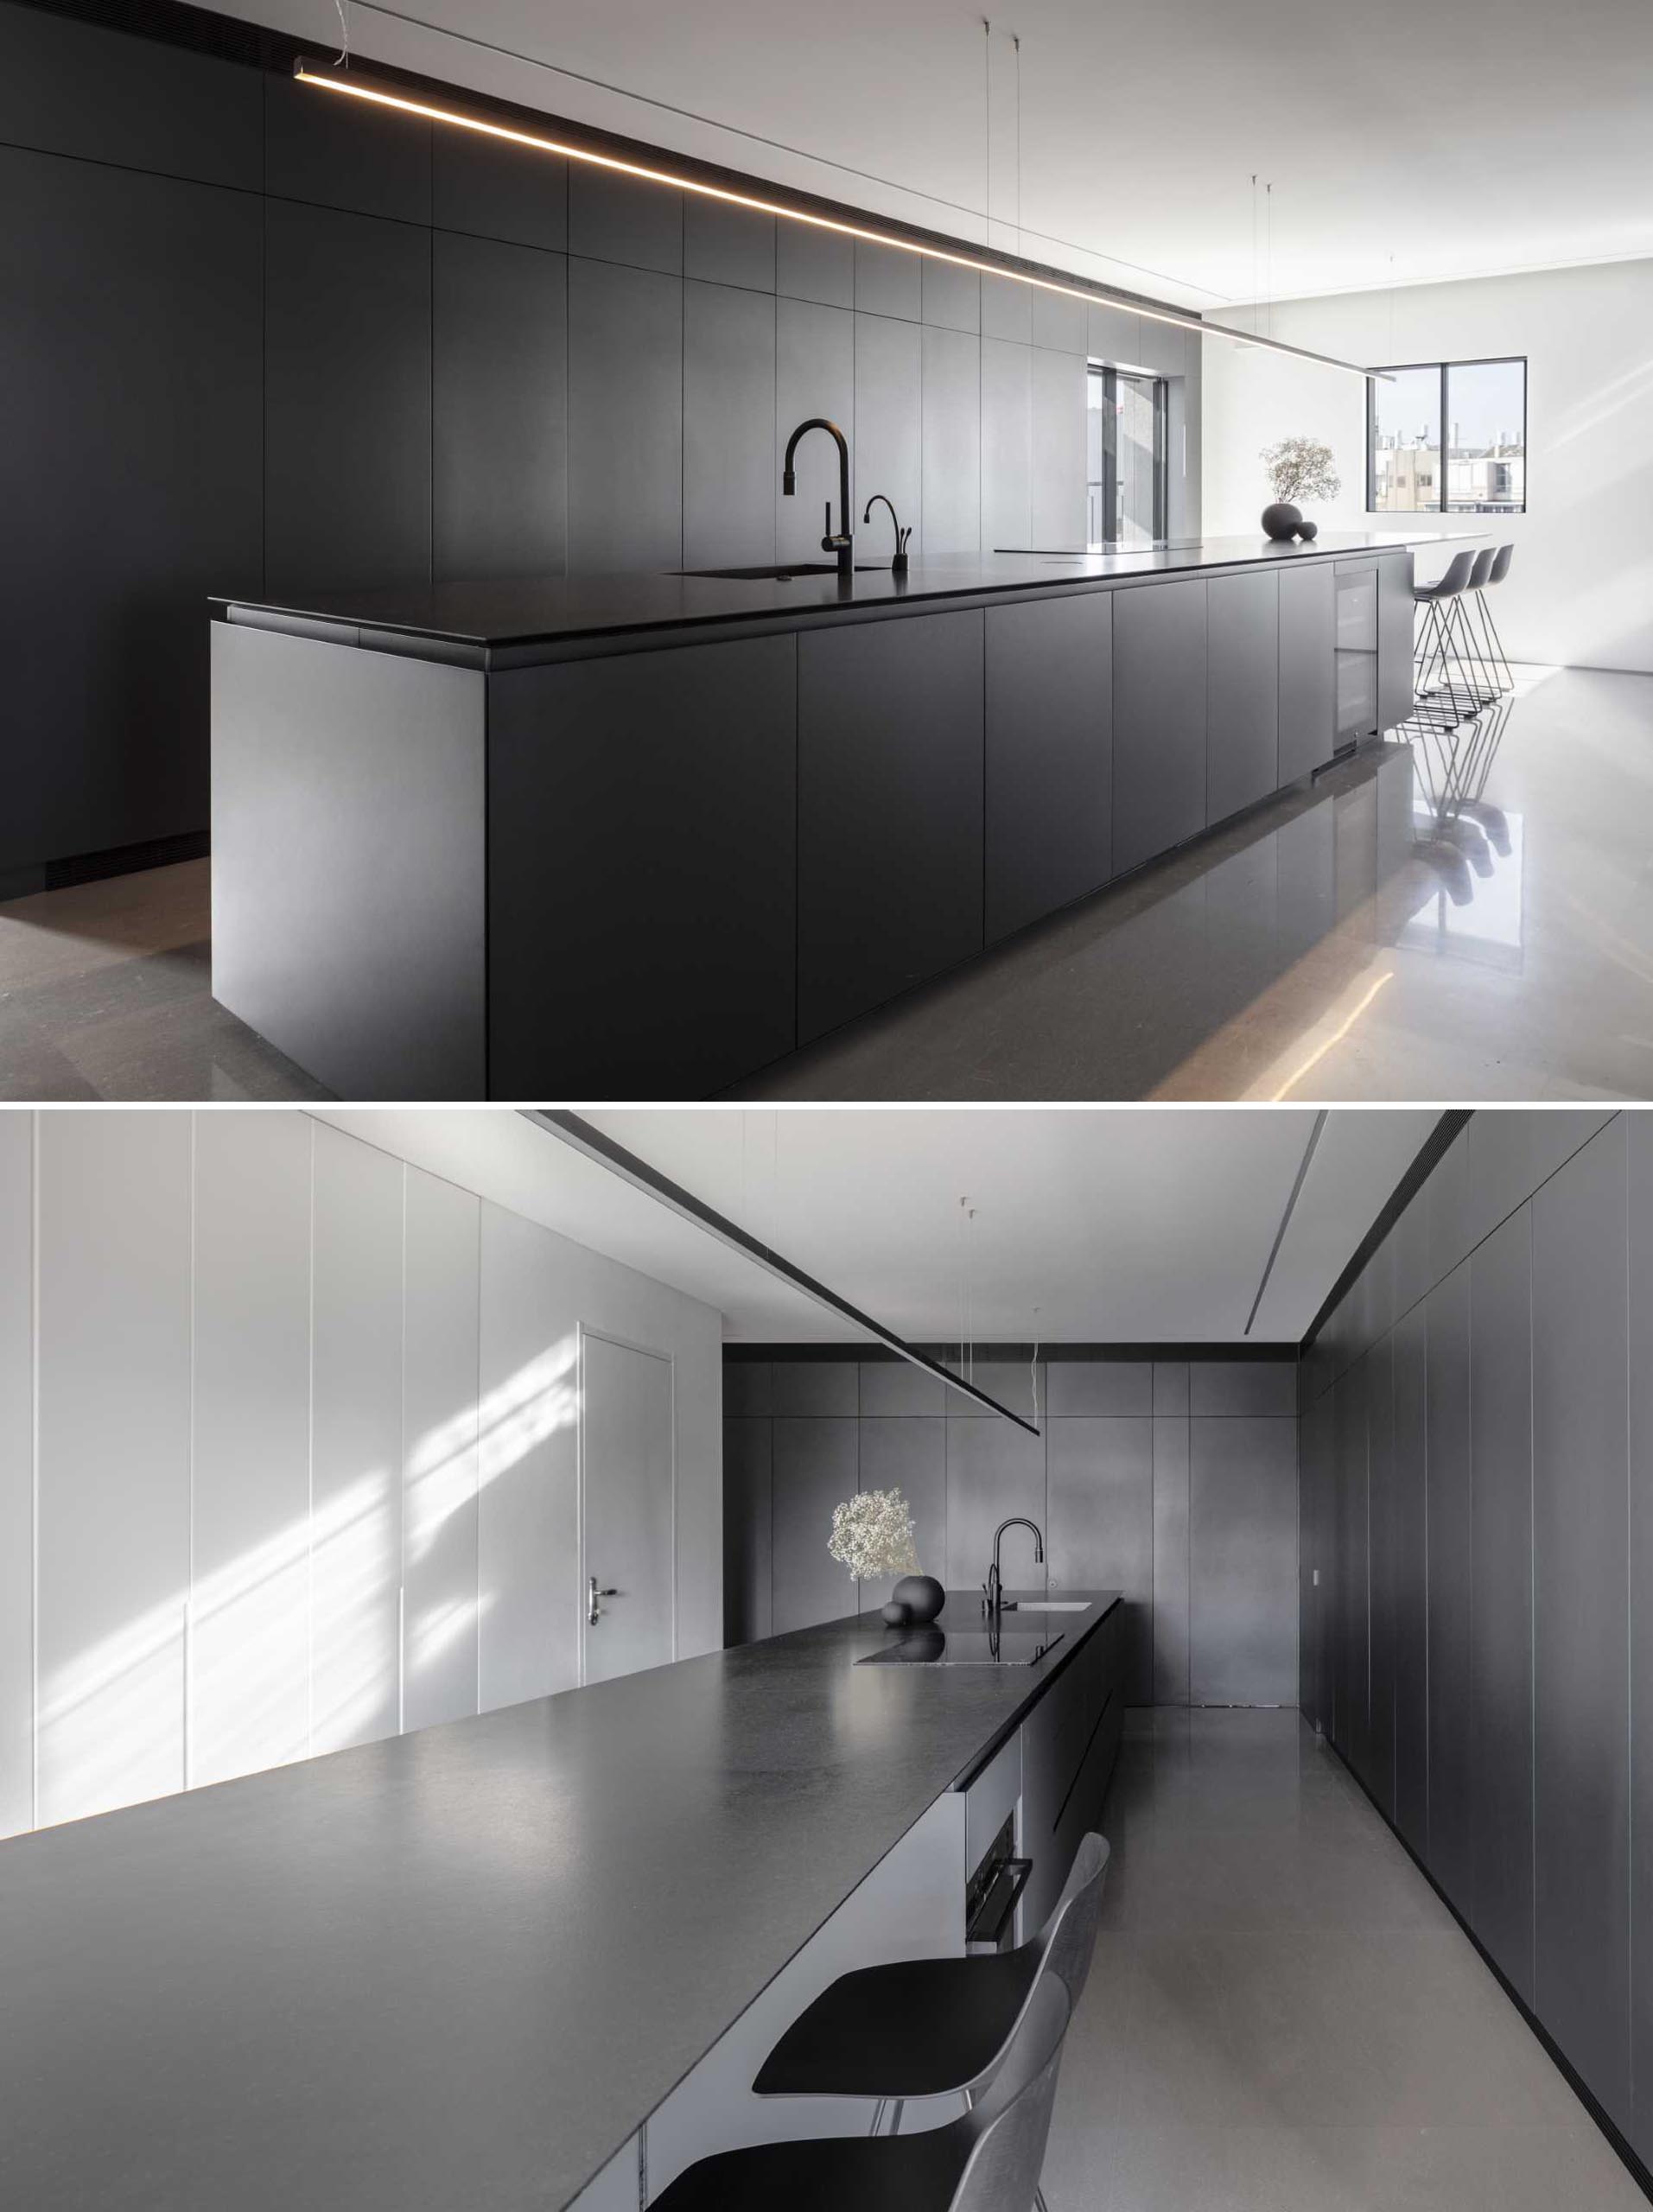 In this modern kitchen, minimalist cabinets in a shade of graphite and white line the wall, while the island is covered with black granite and extends to include space for seating.